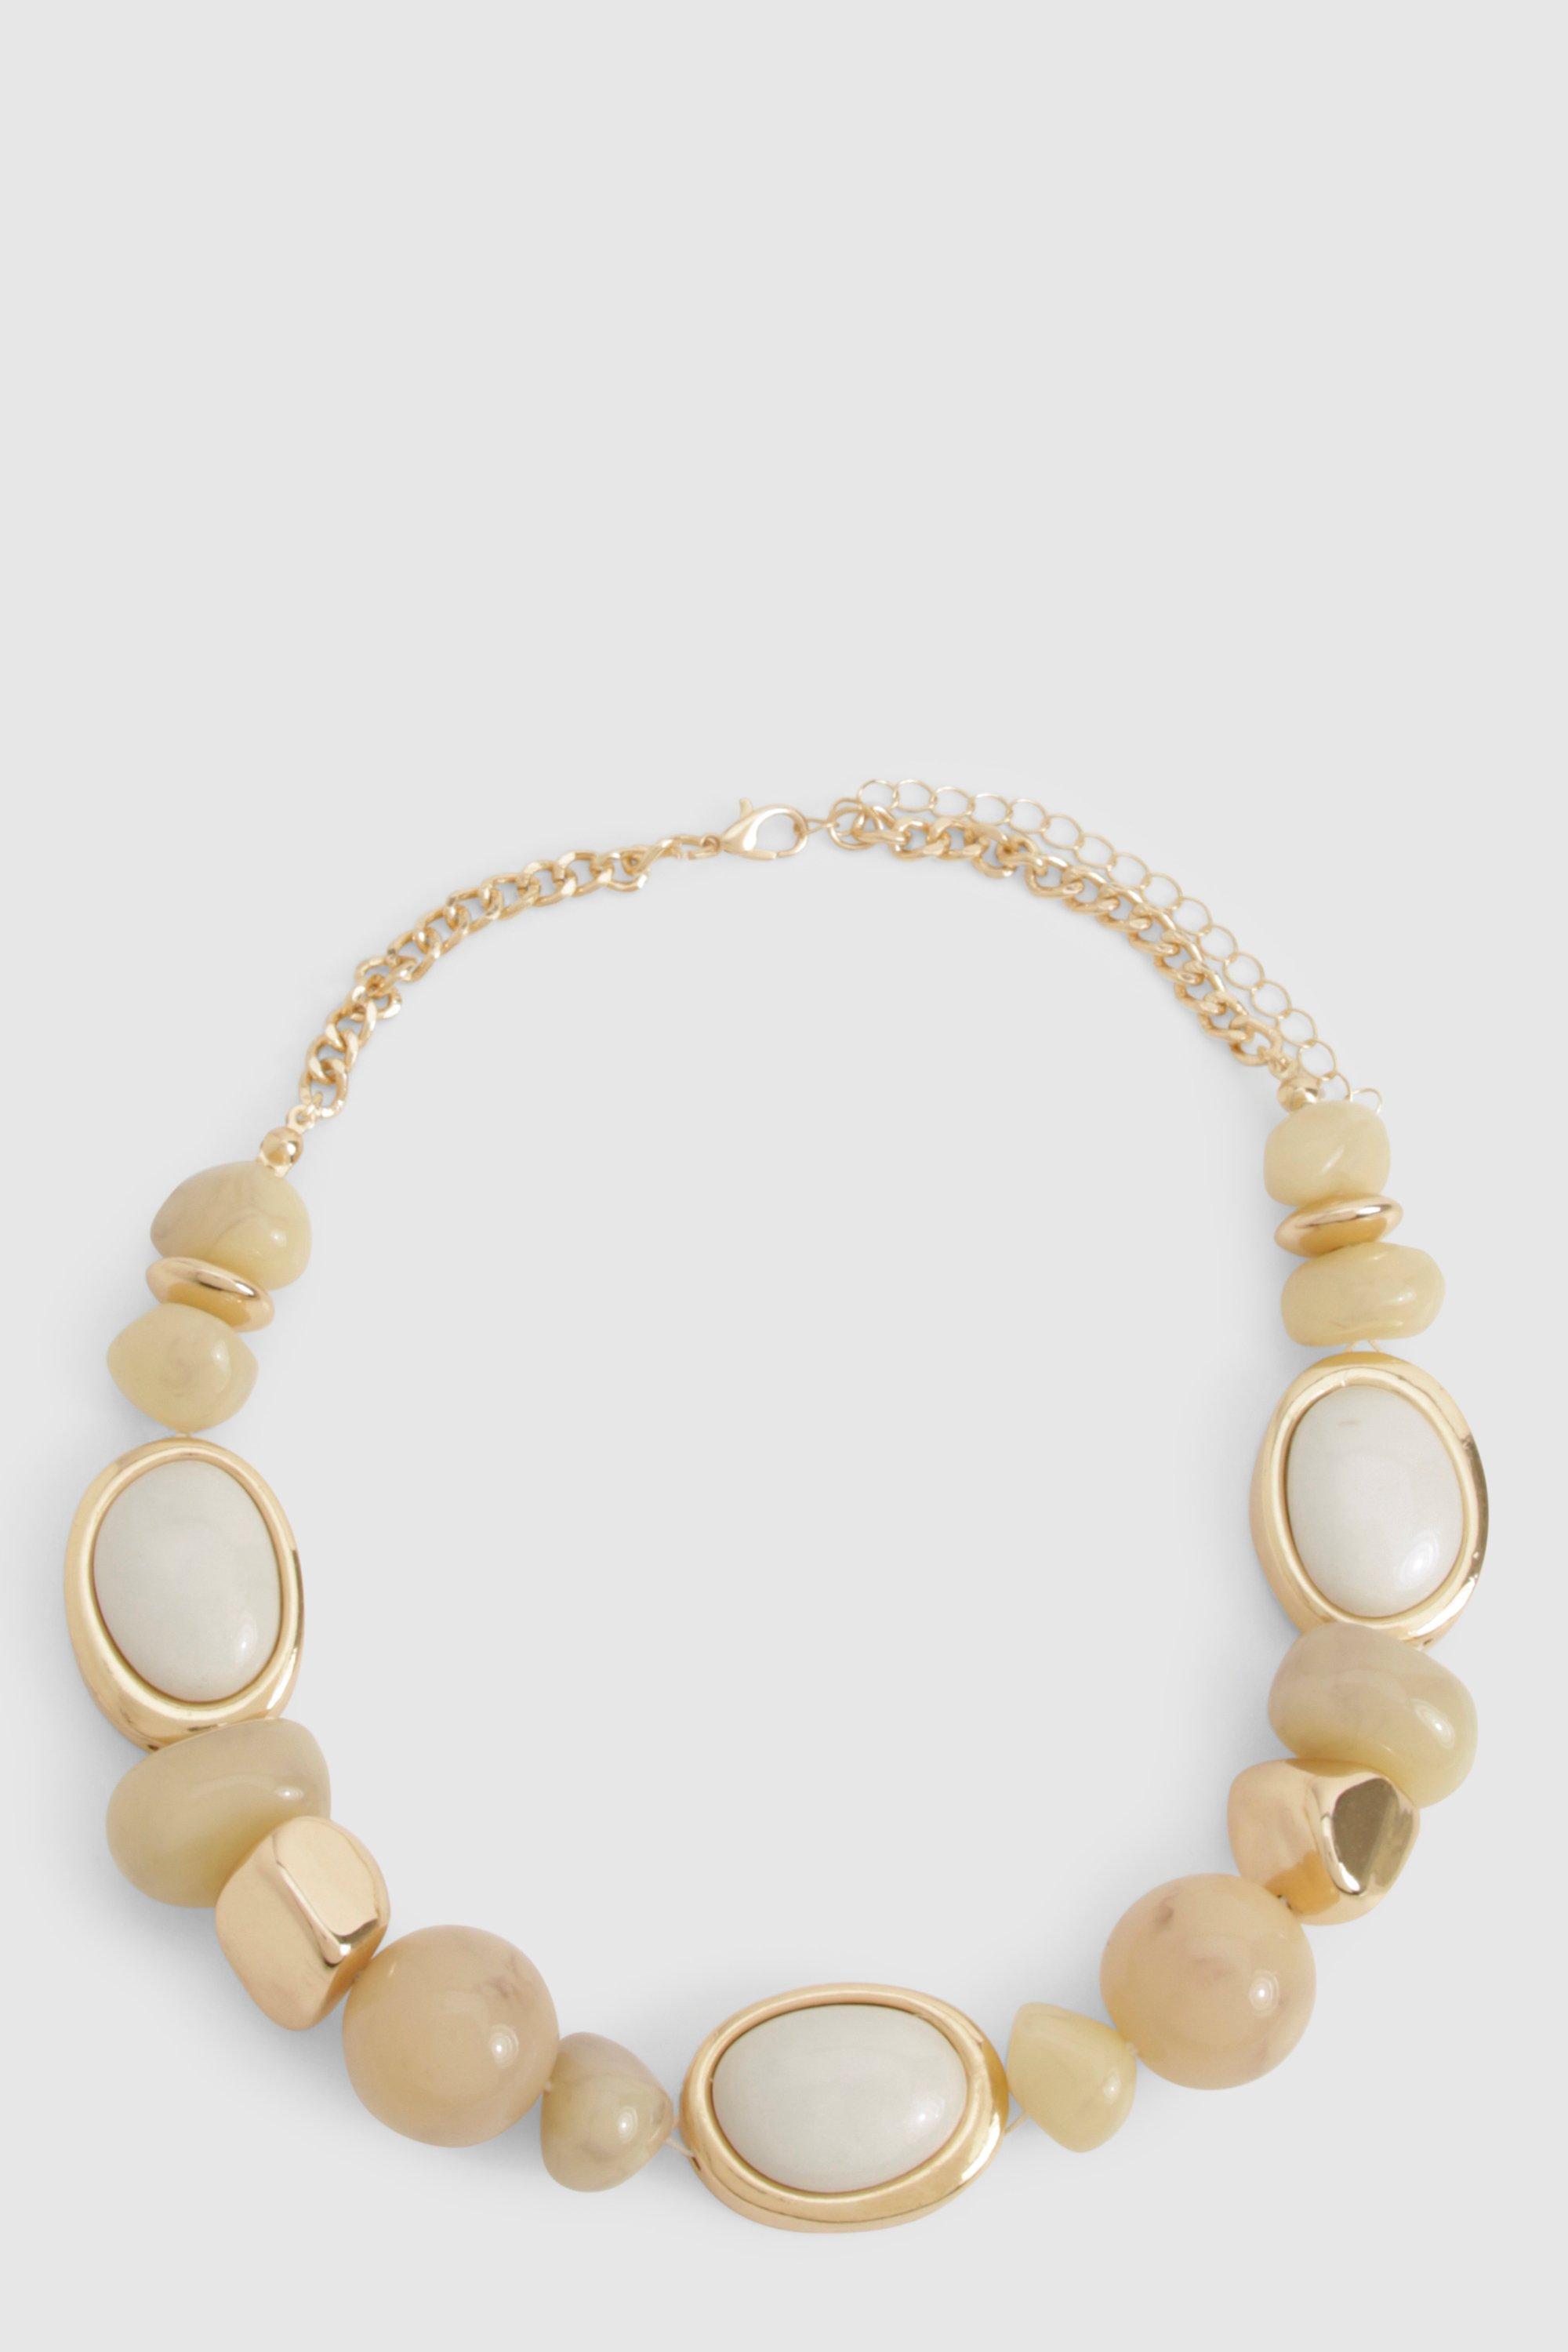 Image of Chunky Statement Beaded Necklace, Metallics